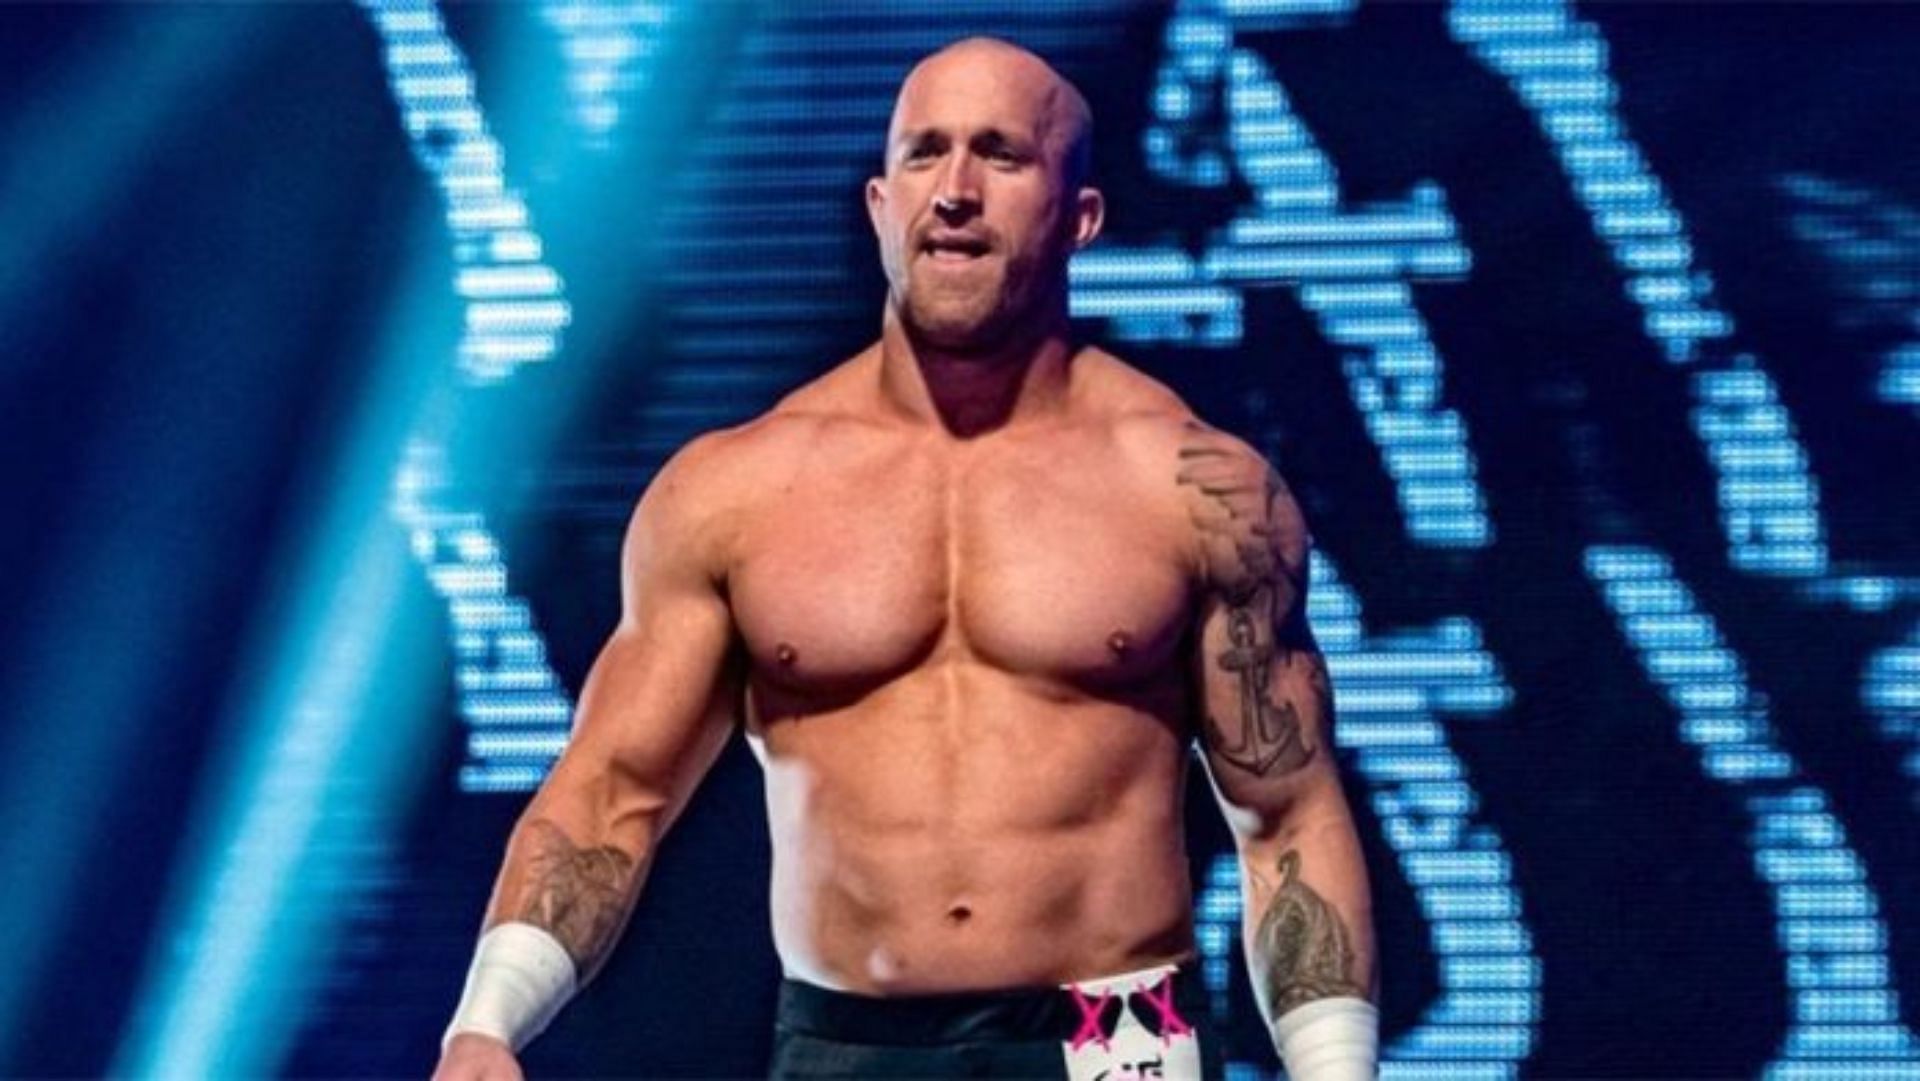 The Former WWE star has flourished as a performer for IMPACT